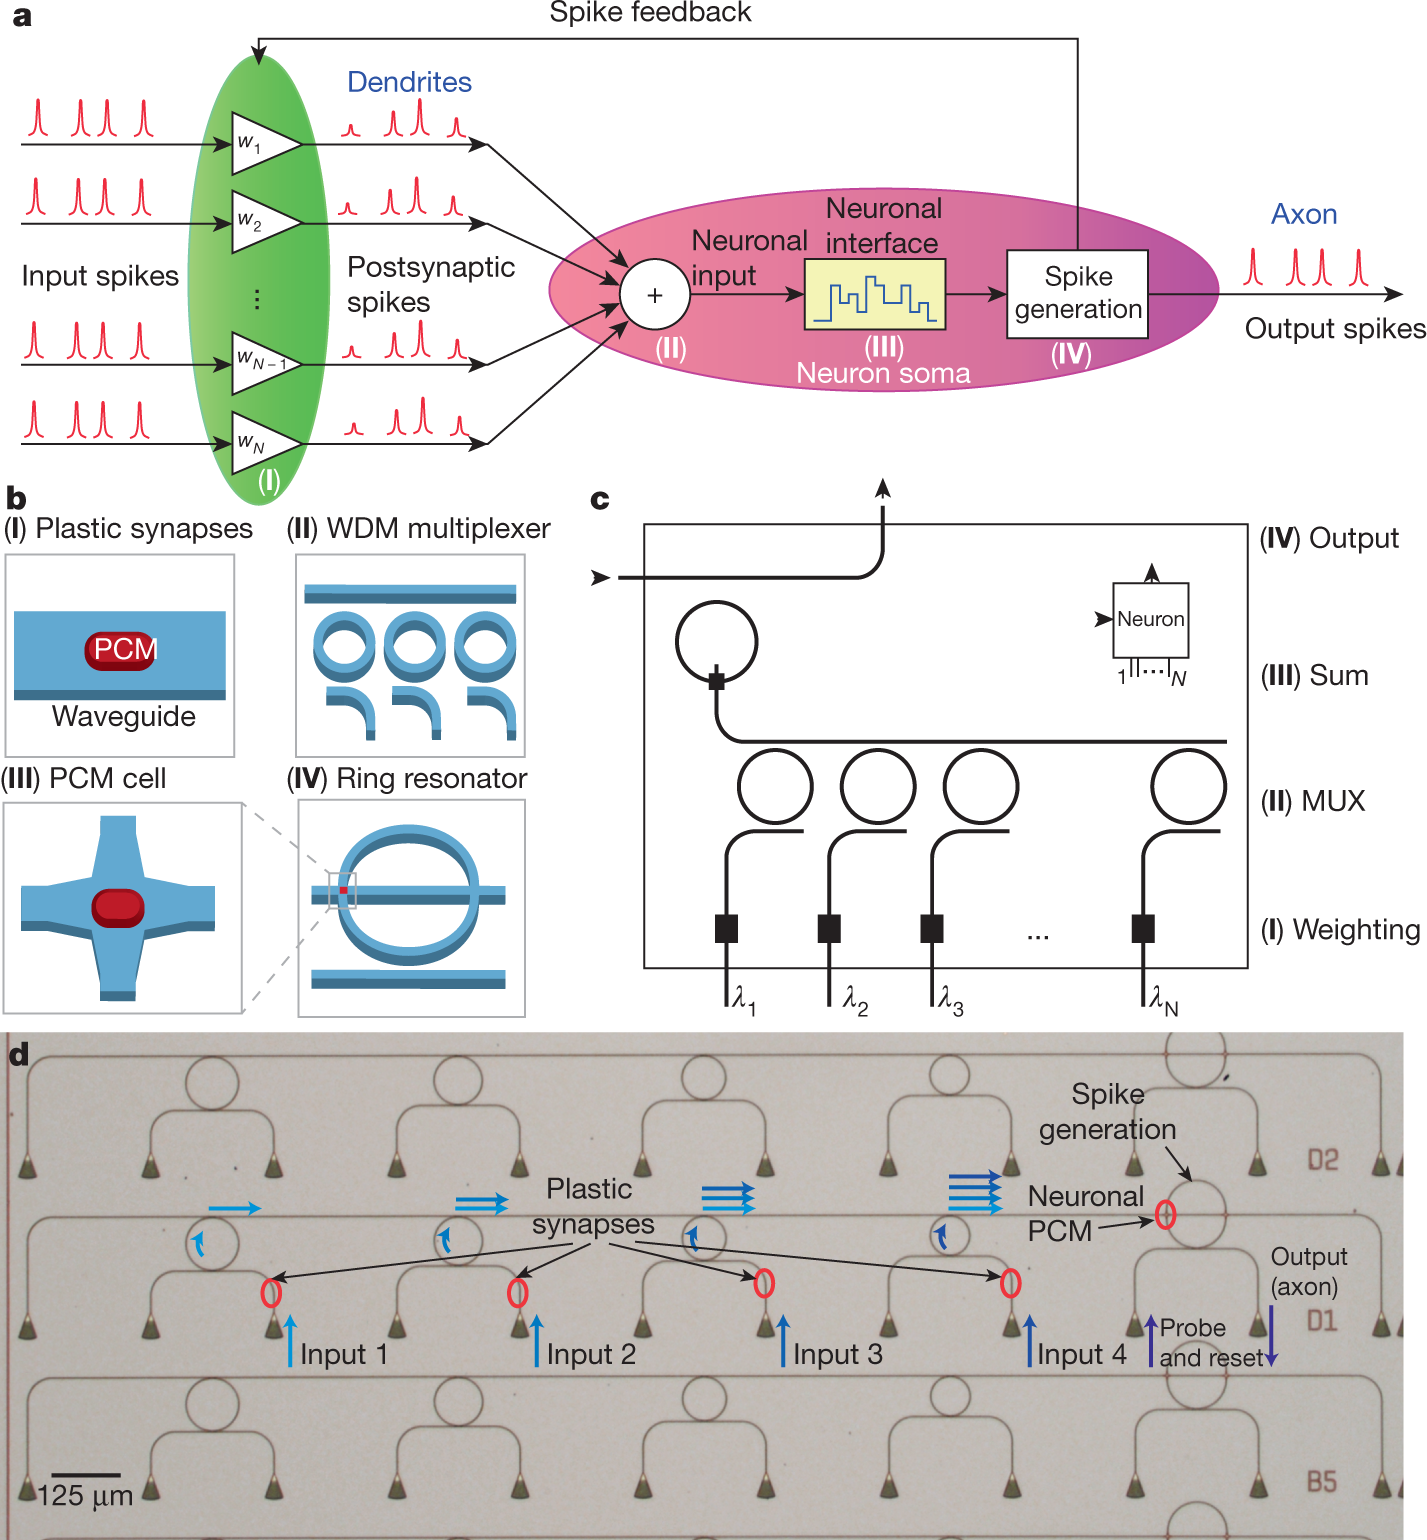 All-optical spiking neurosynaptic networks with self-learning capabilities  | Nature